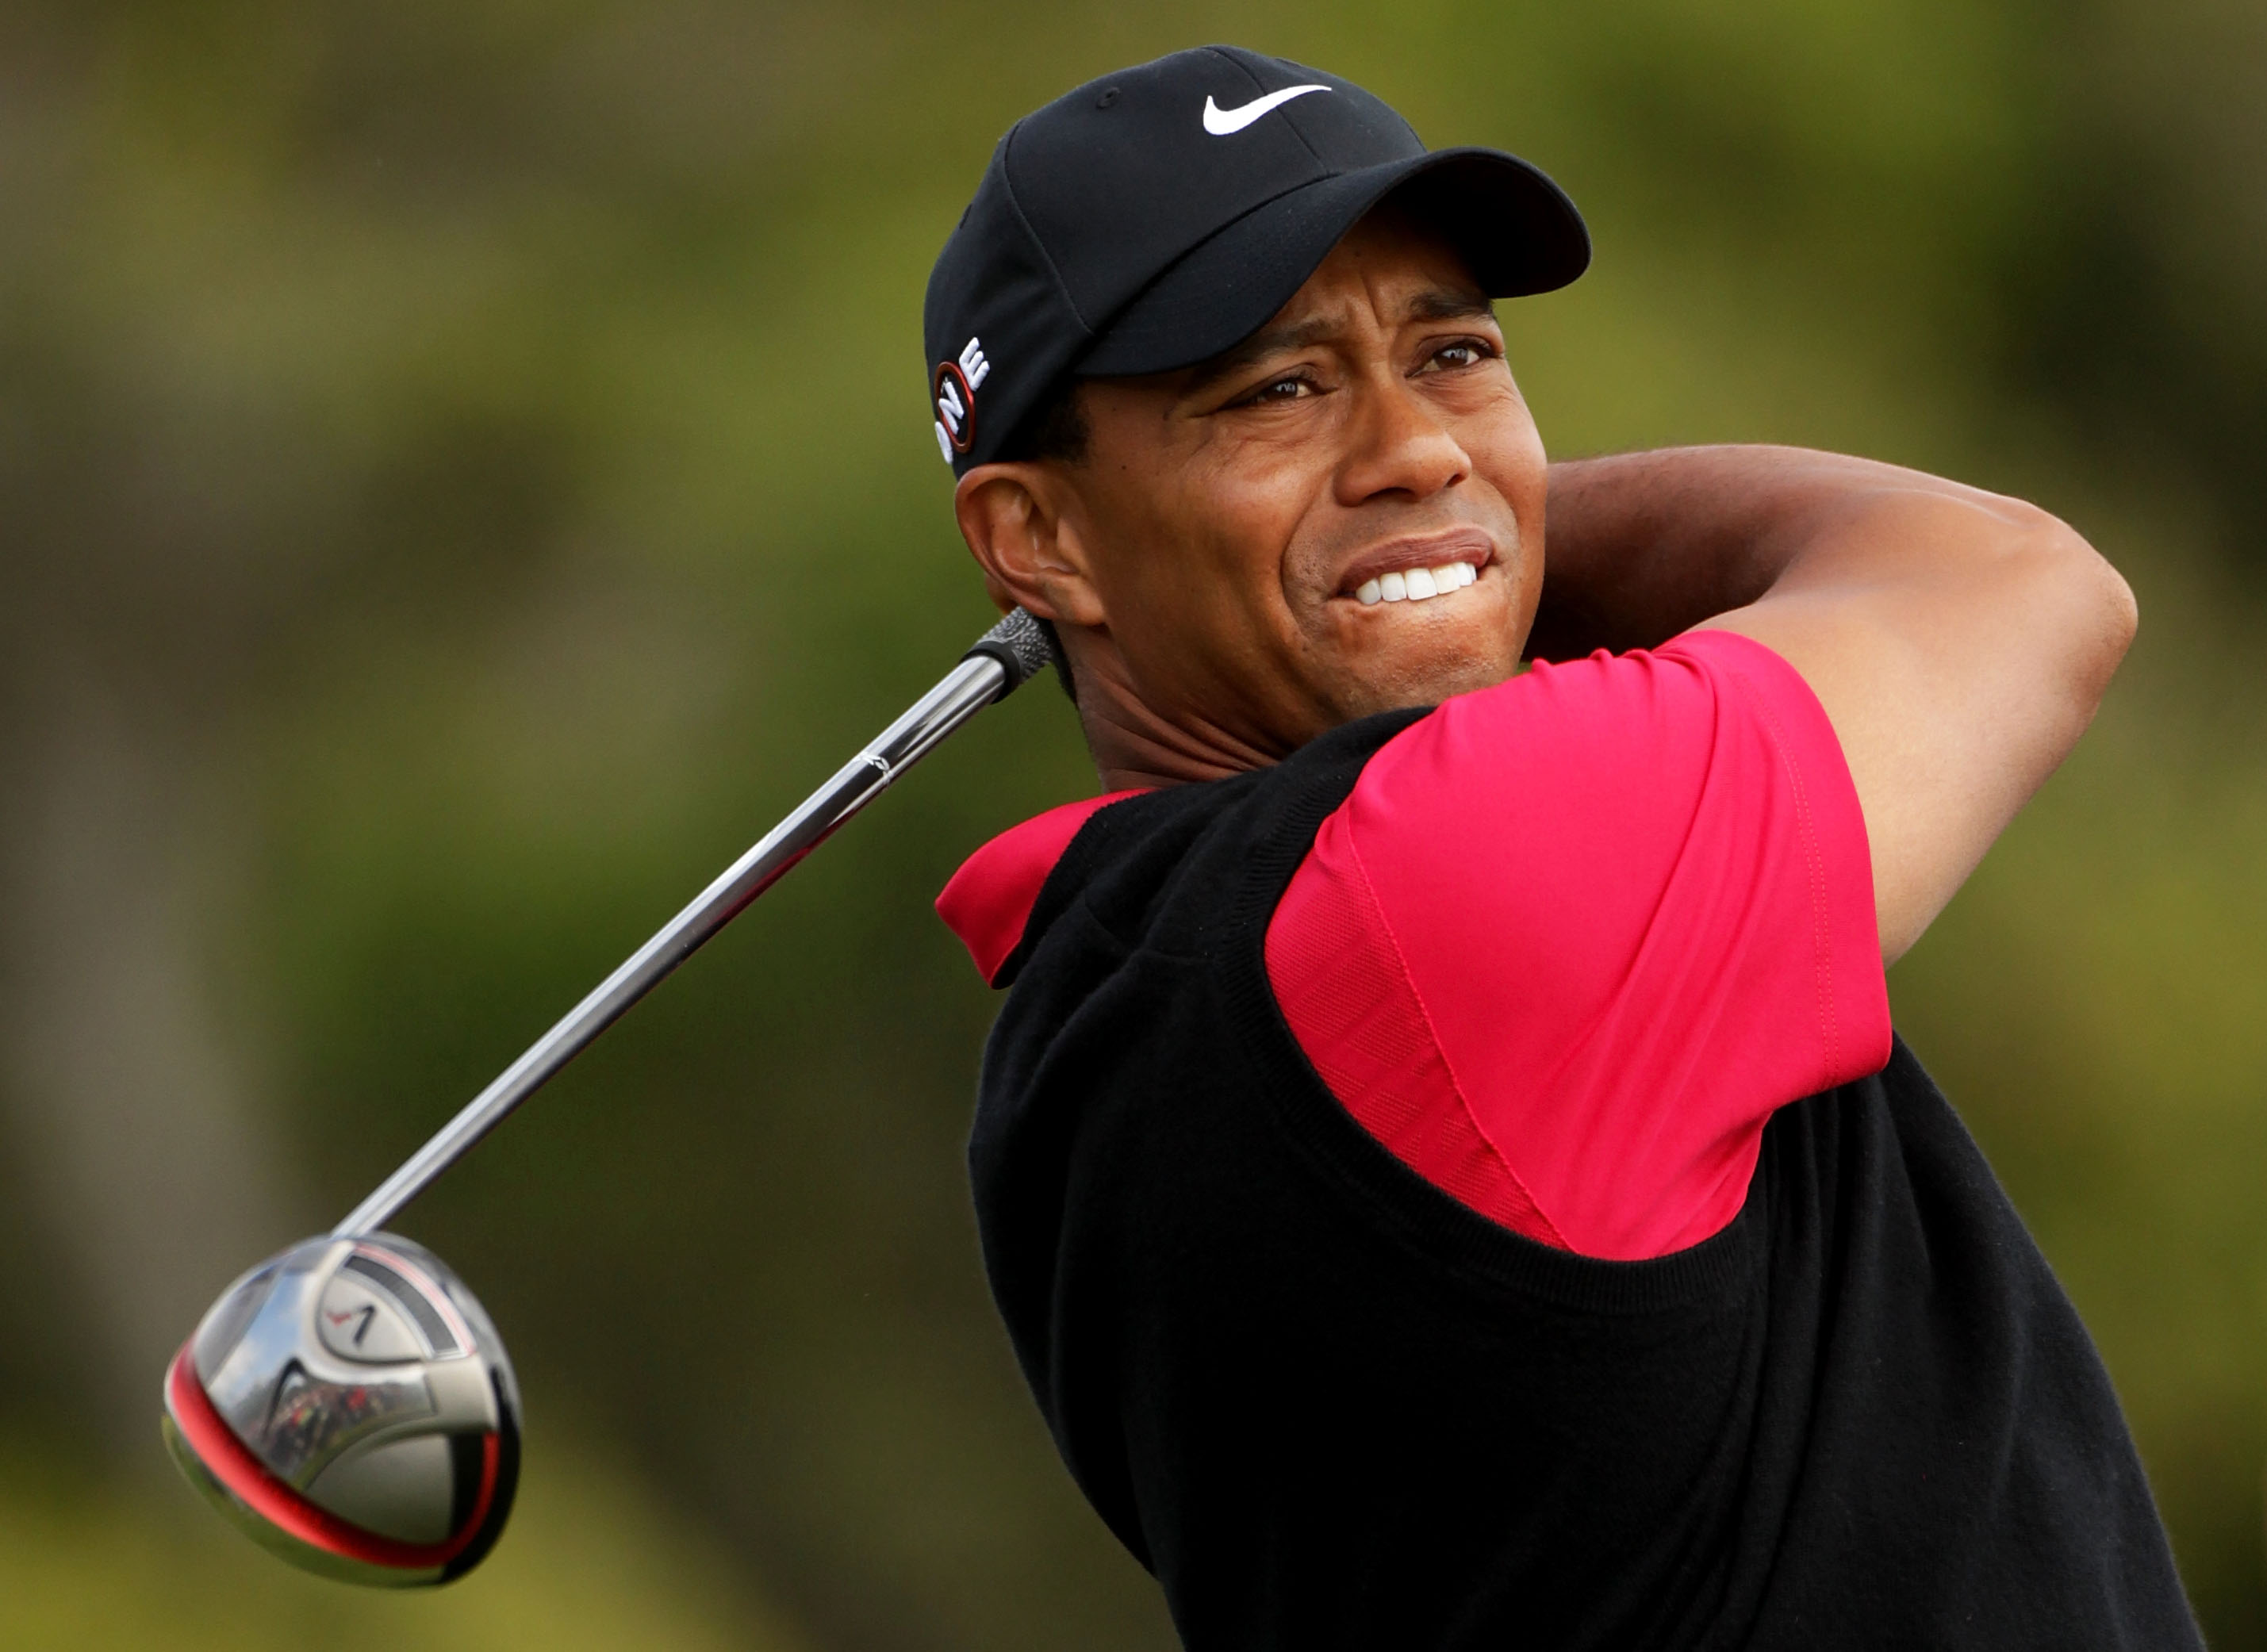 Tiger Woods Backgrounds, Compatible - PC, Mobile, Gadgets| 2858x2083 px